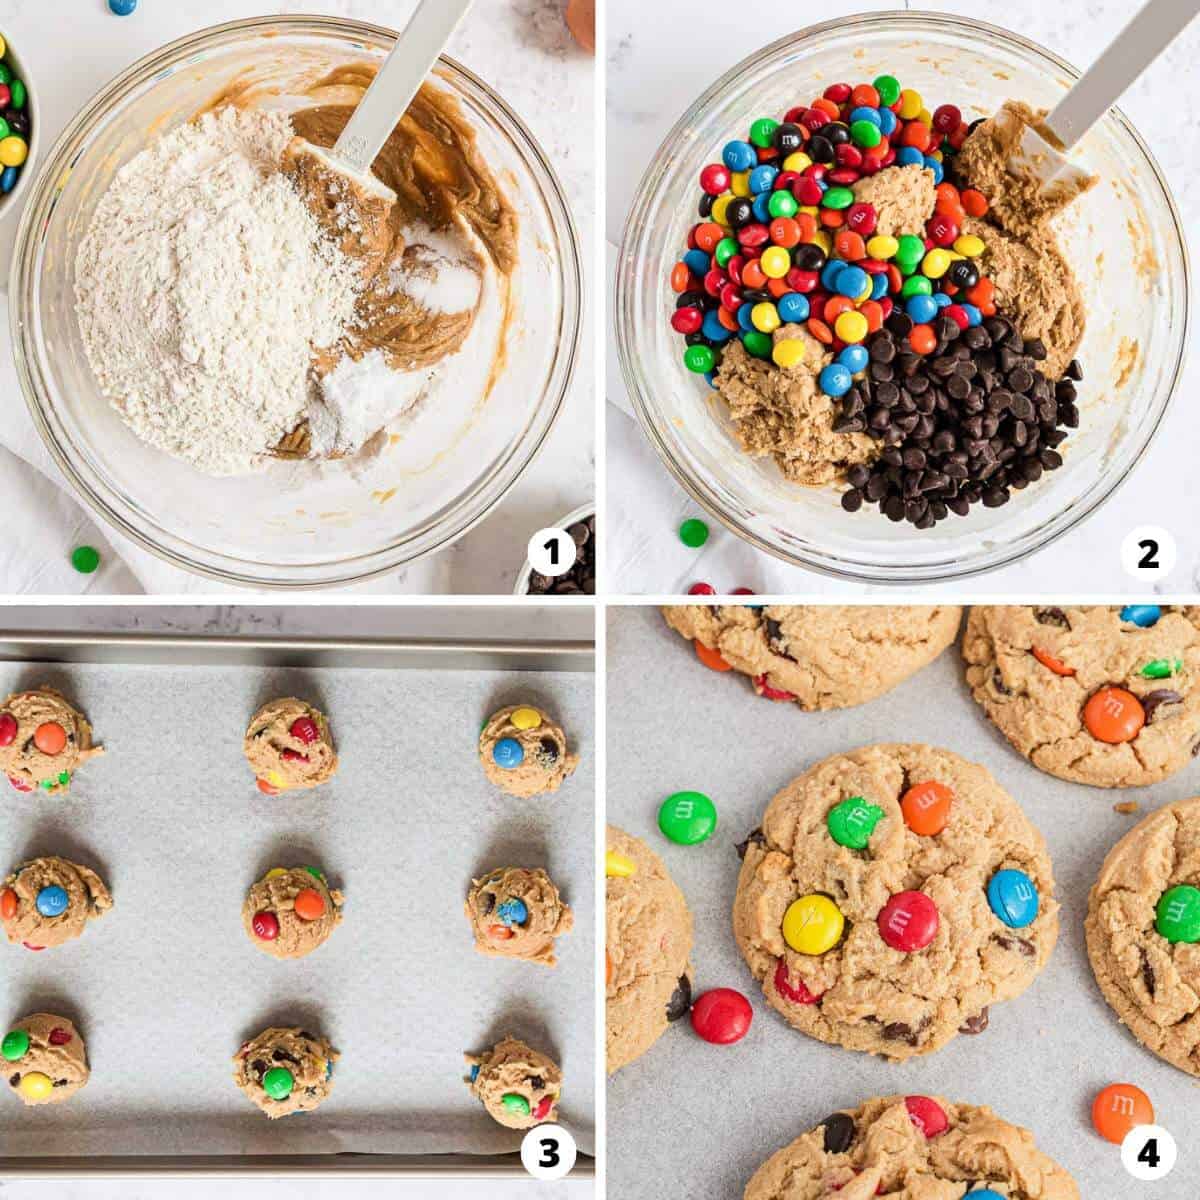 Showing how to make peanut butter cookies in a 4 step collage.